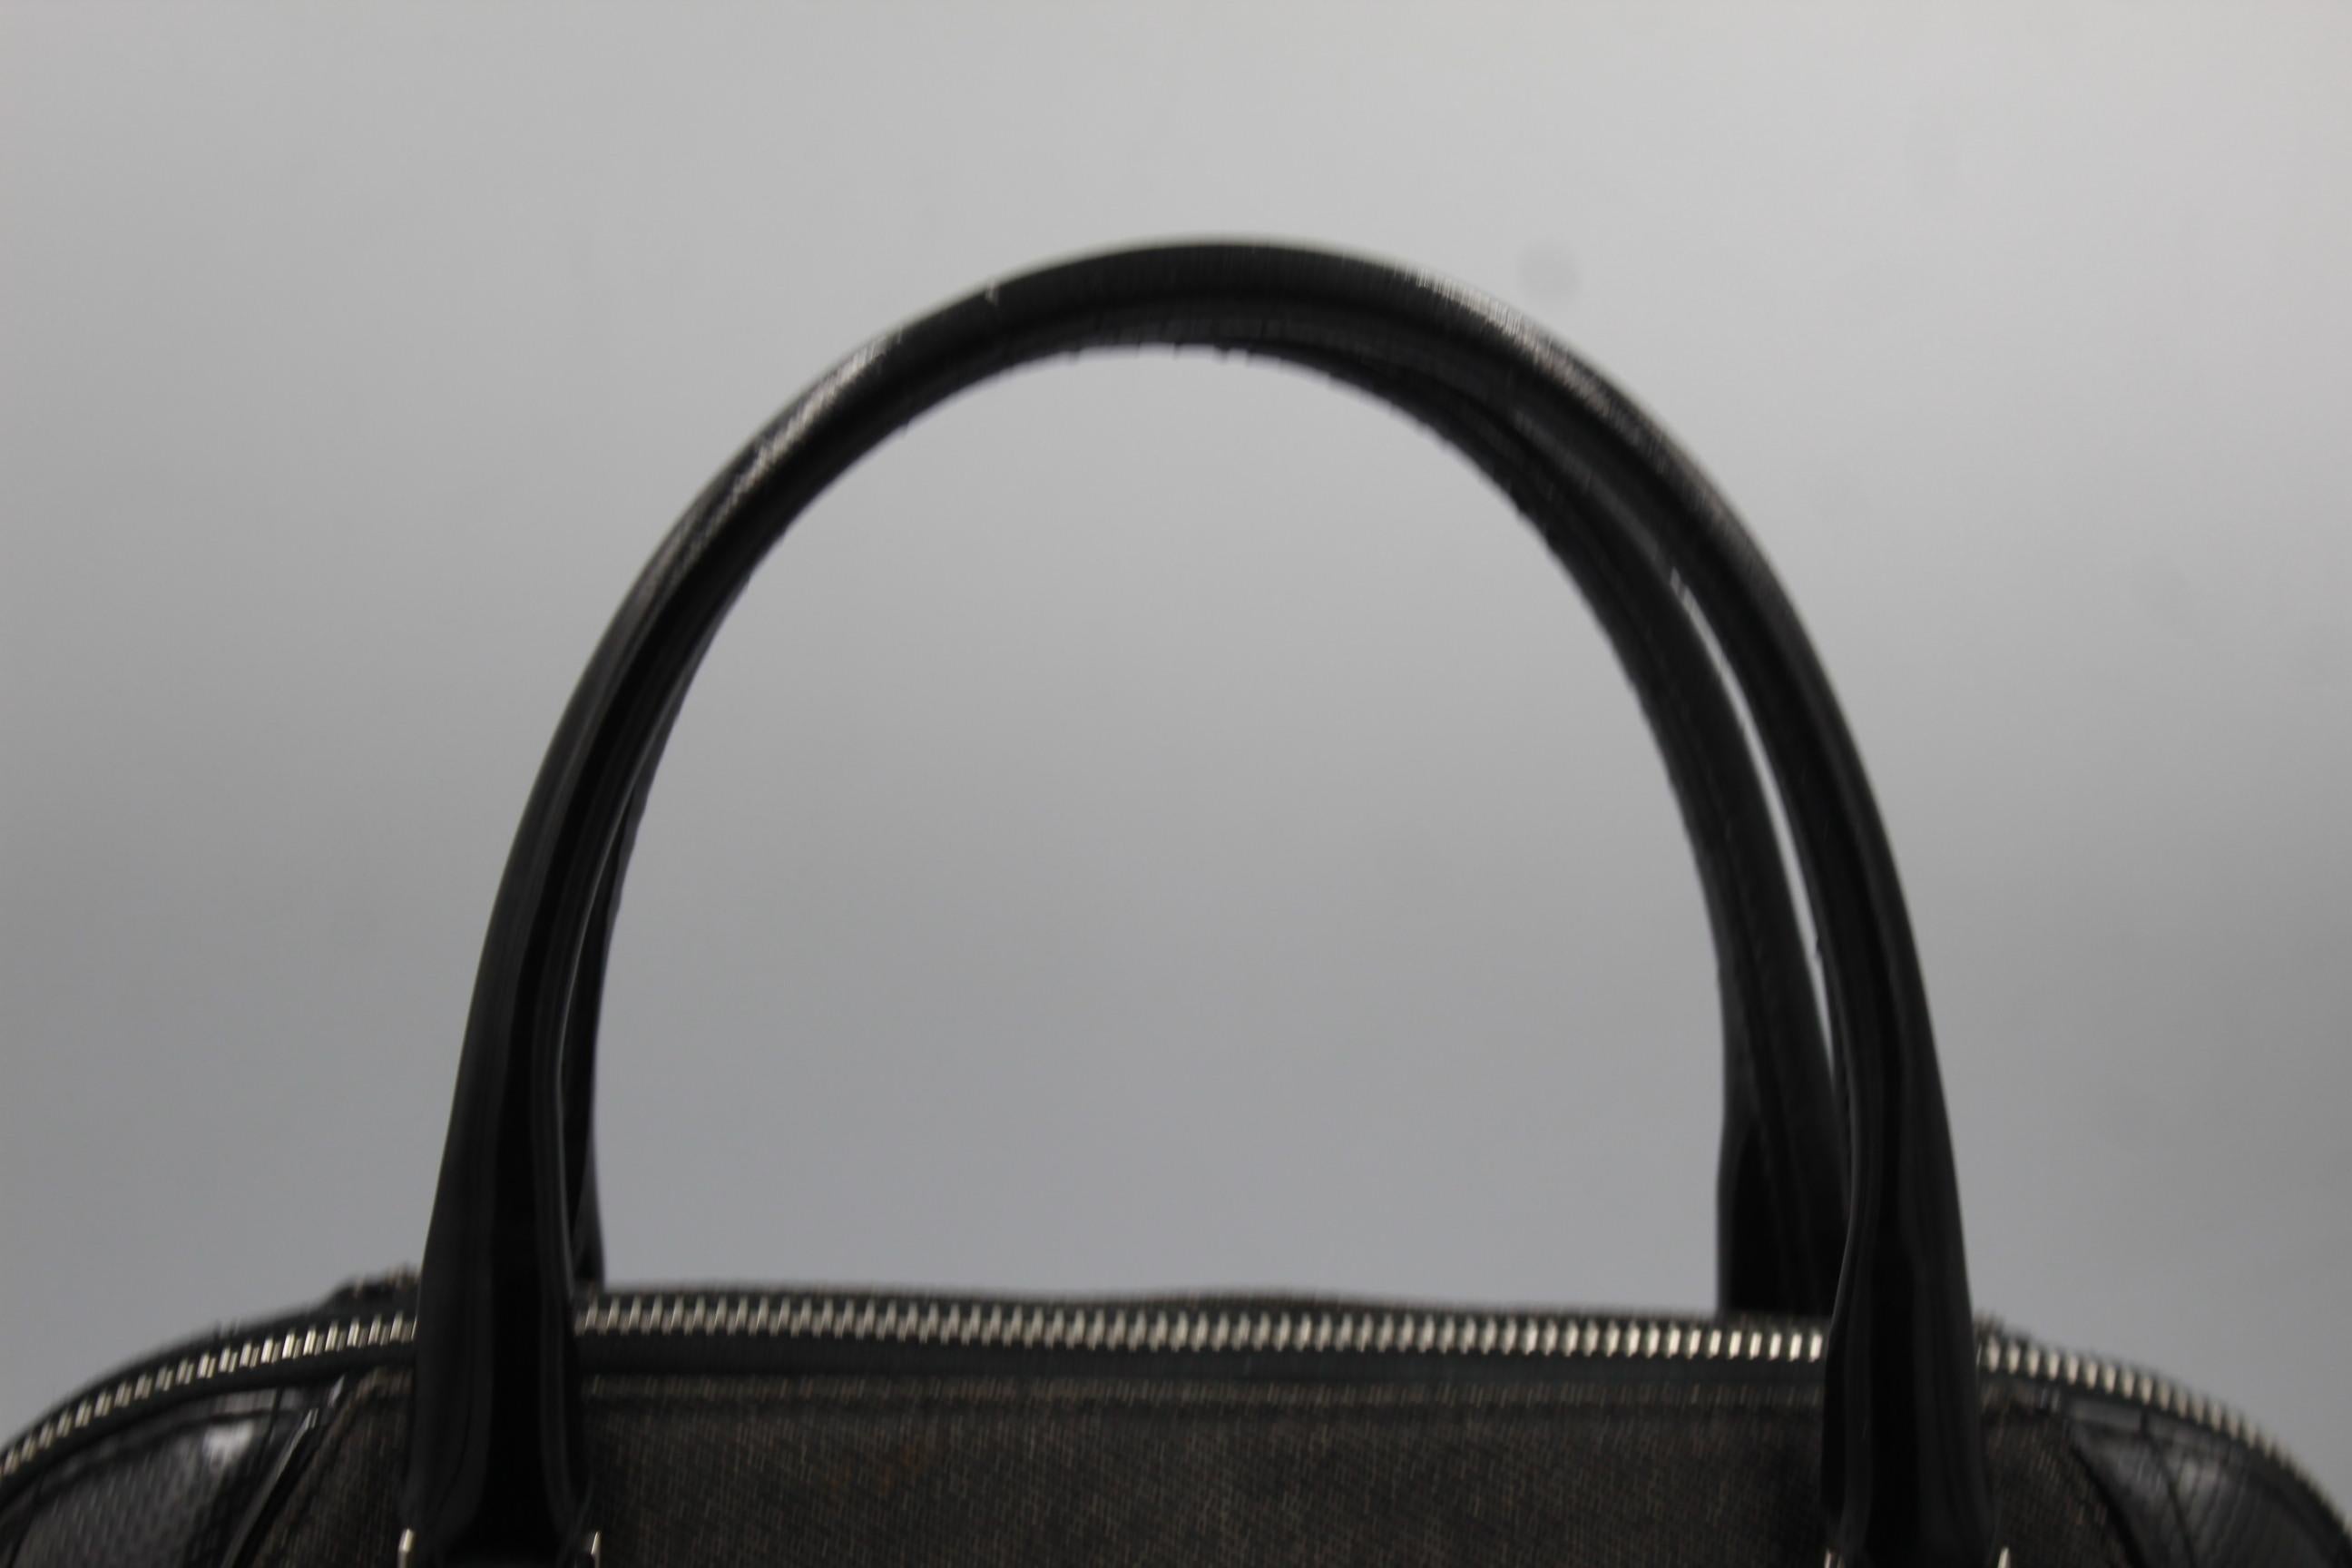 John Galliano for Dior 2001 Cadillac bag in black lambskin leather 
Good condition , some light signs of use
Size 35x18 cm
